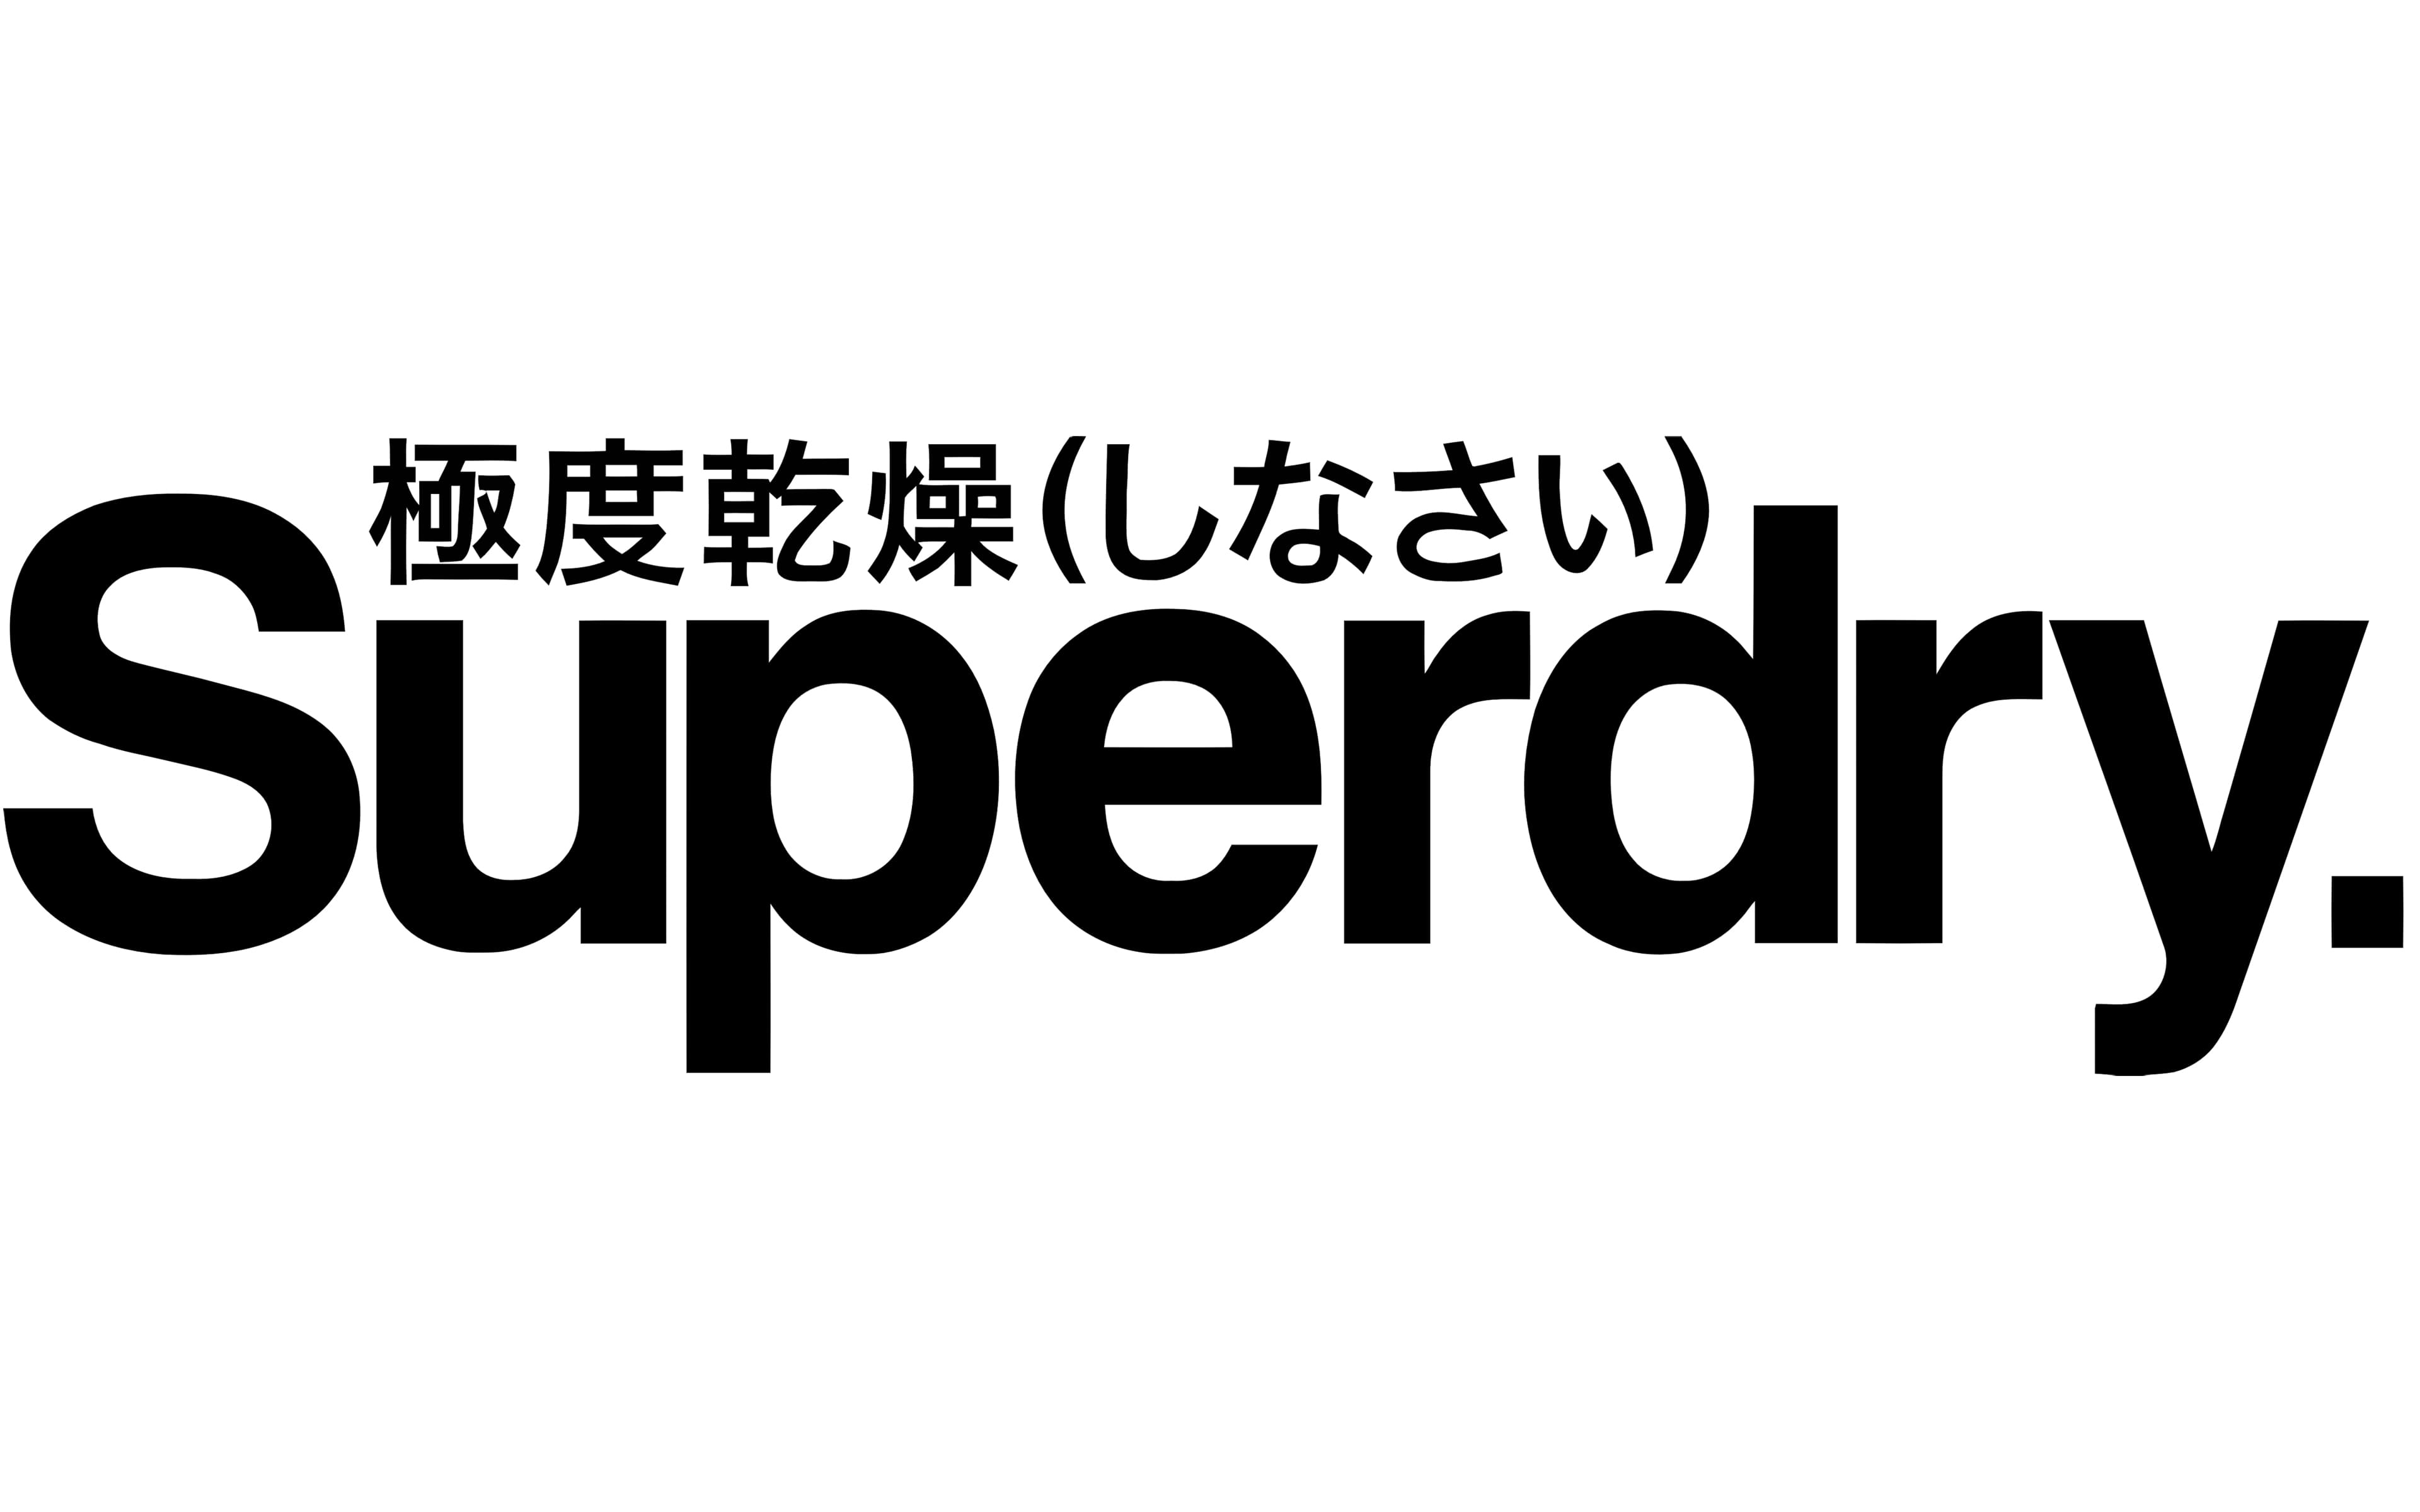 Superdry, Reliance Brands sign IP joint venture agreement